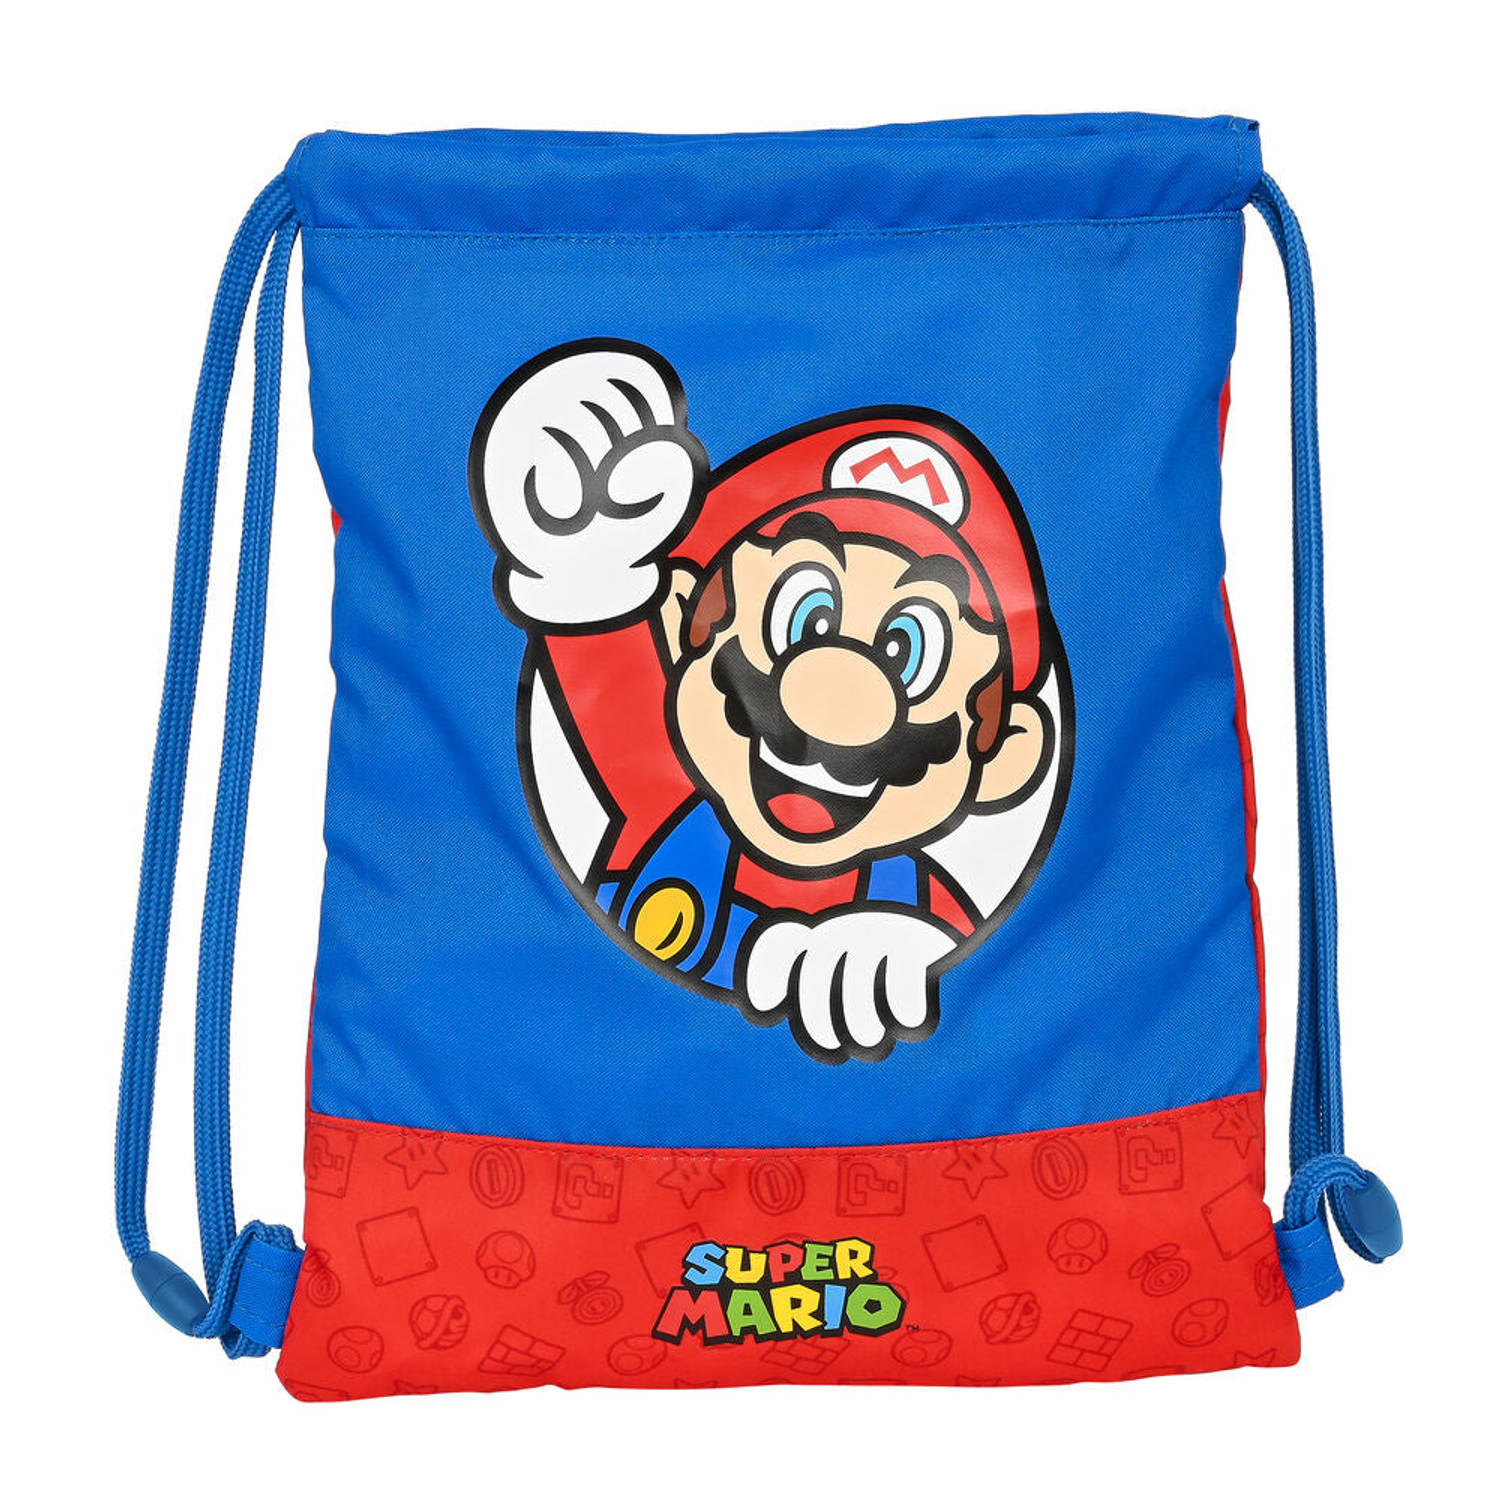 Super Mario Gymbag Here We Go! - 40 x 35 cm - Polyester